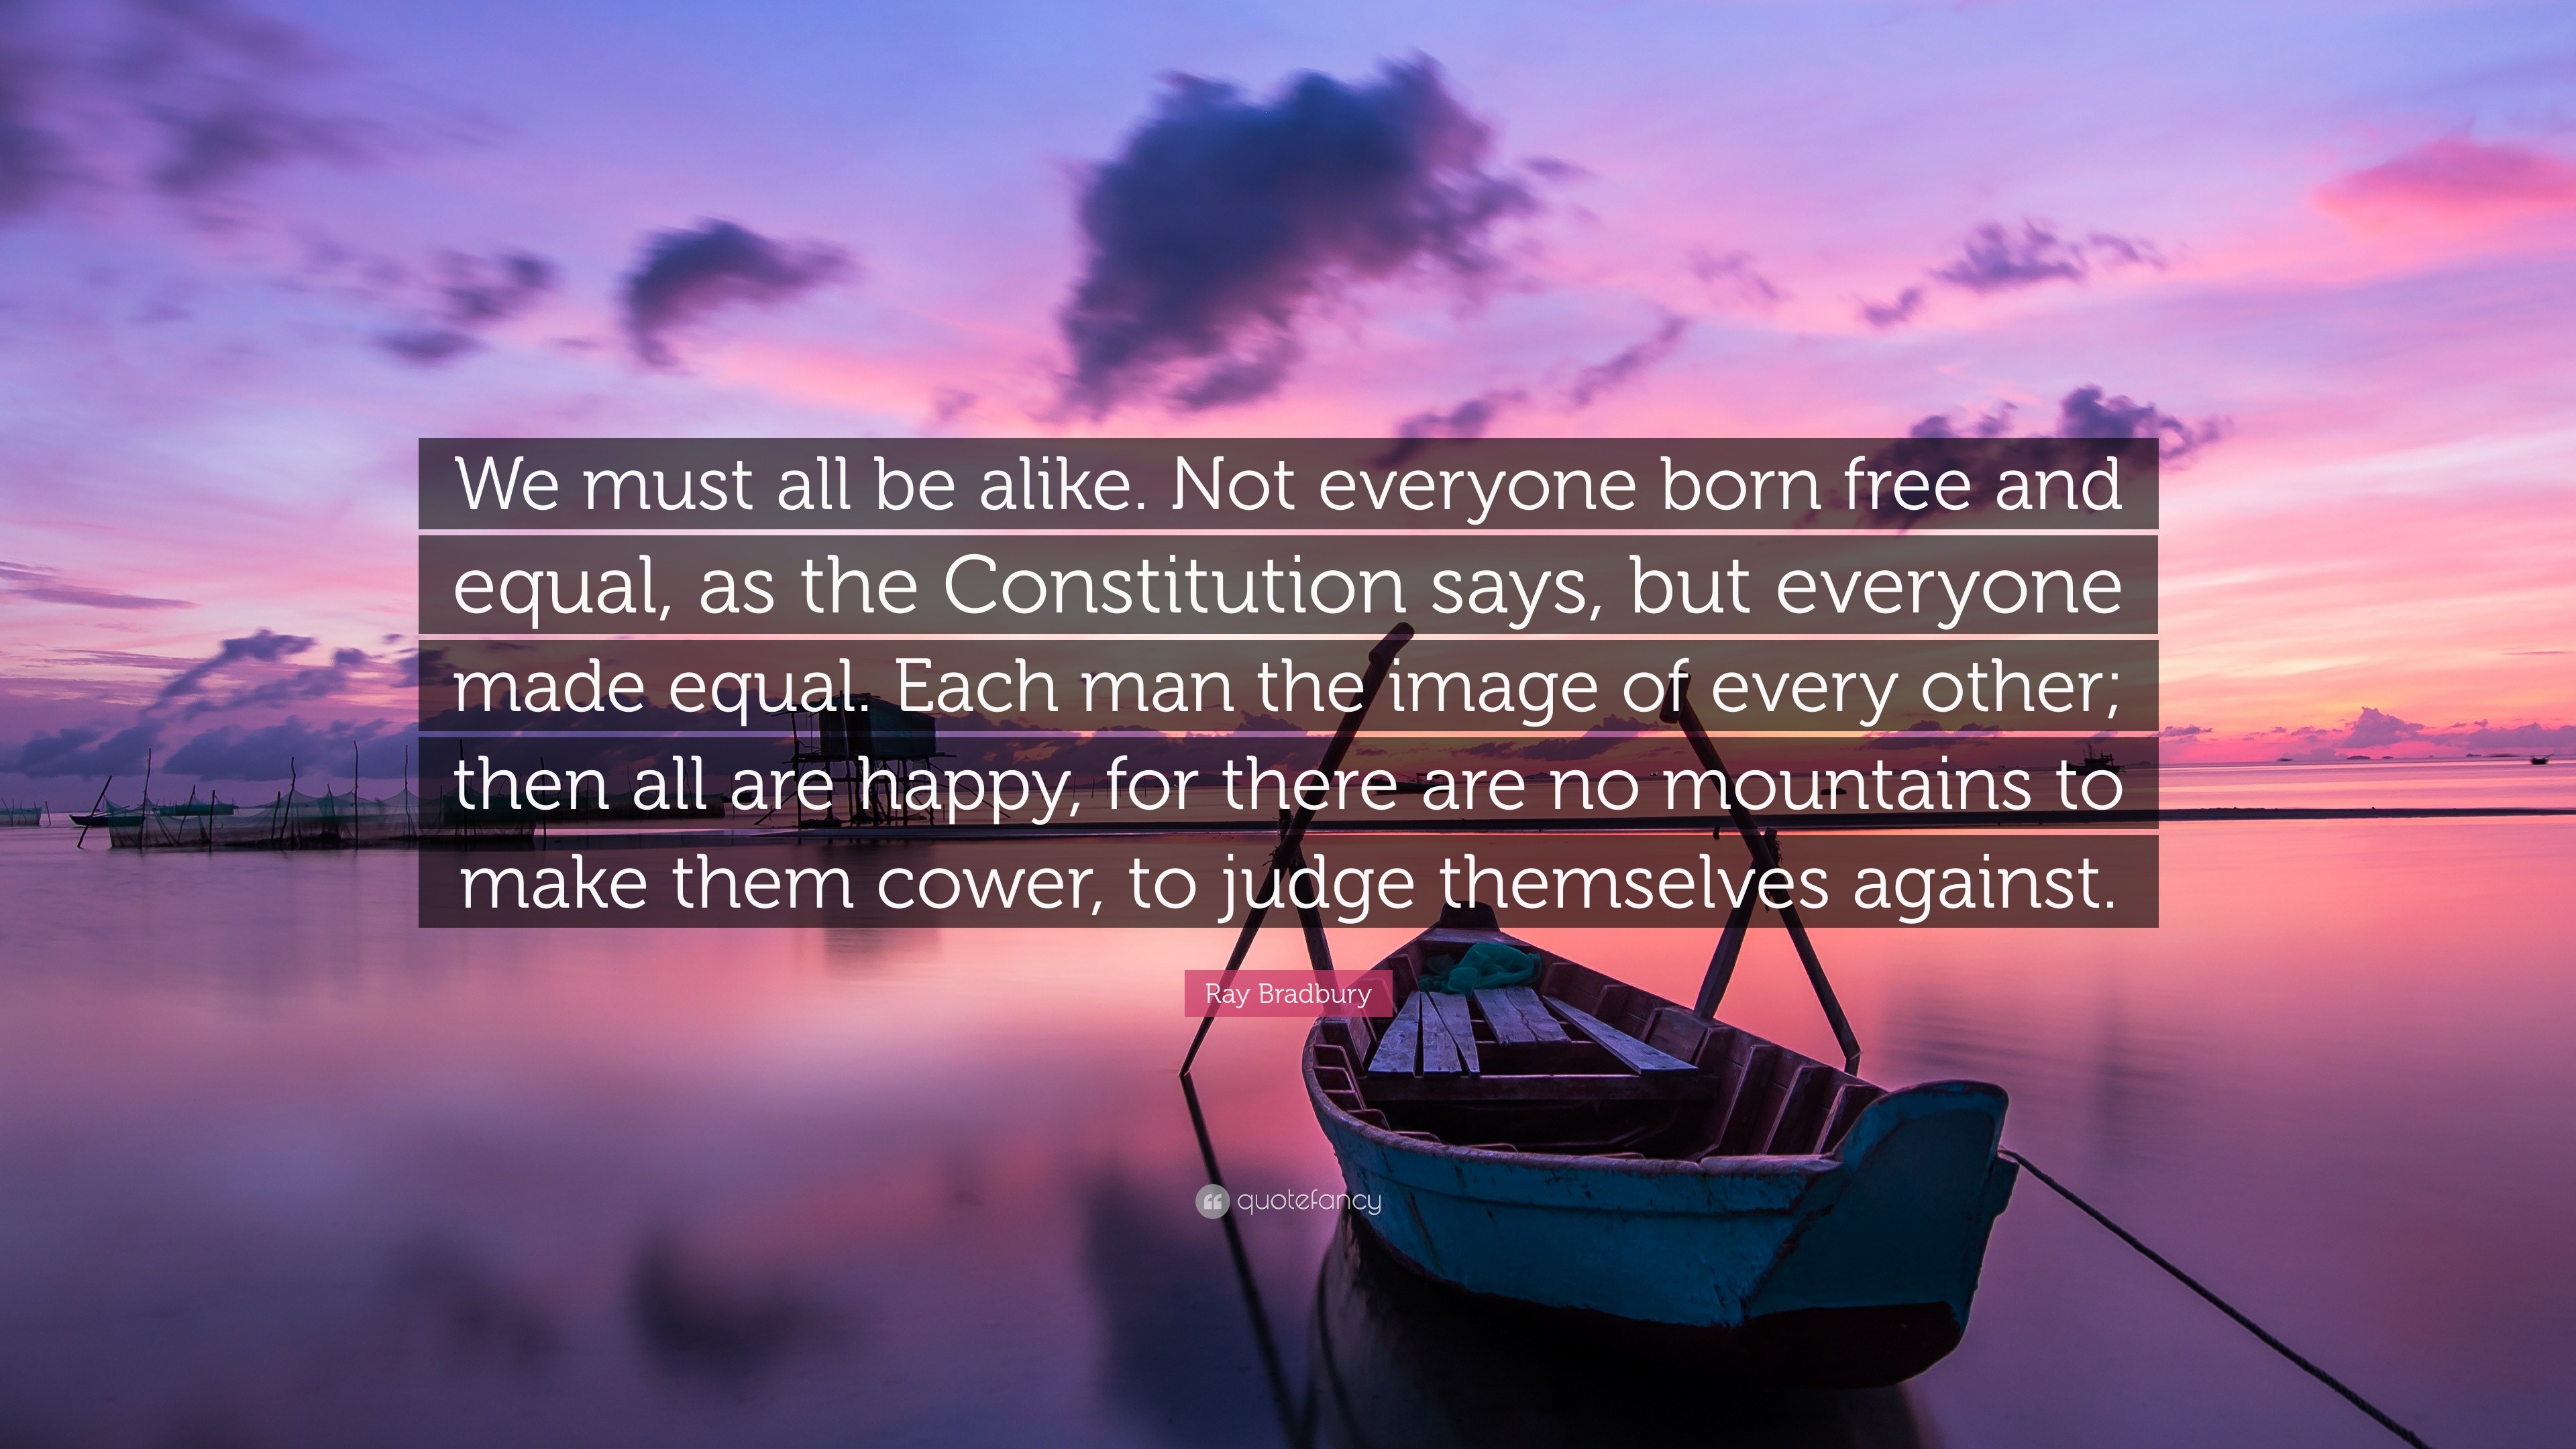 Ray Bradbury Quote: “We must all be alike. Not everyone born free and